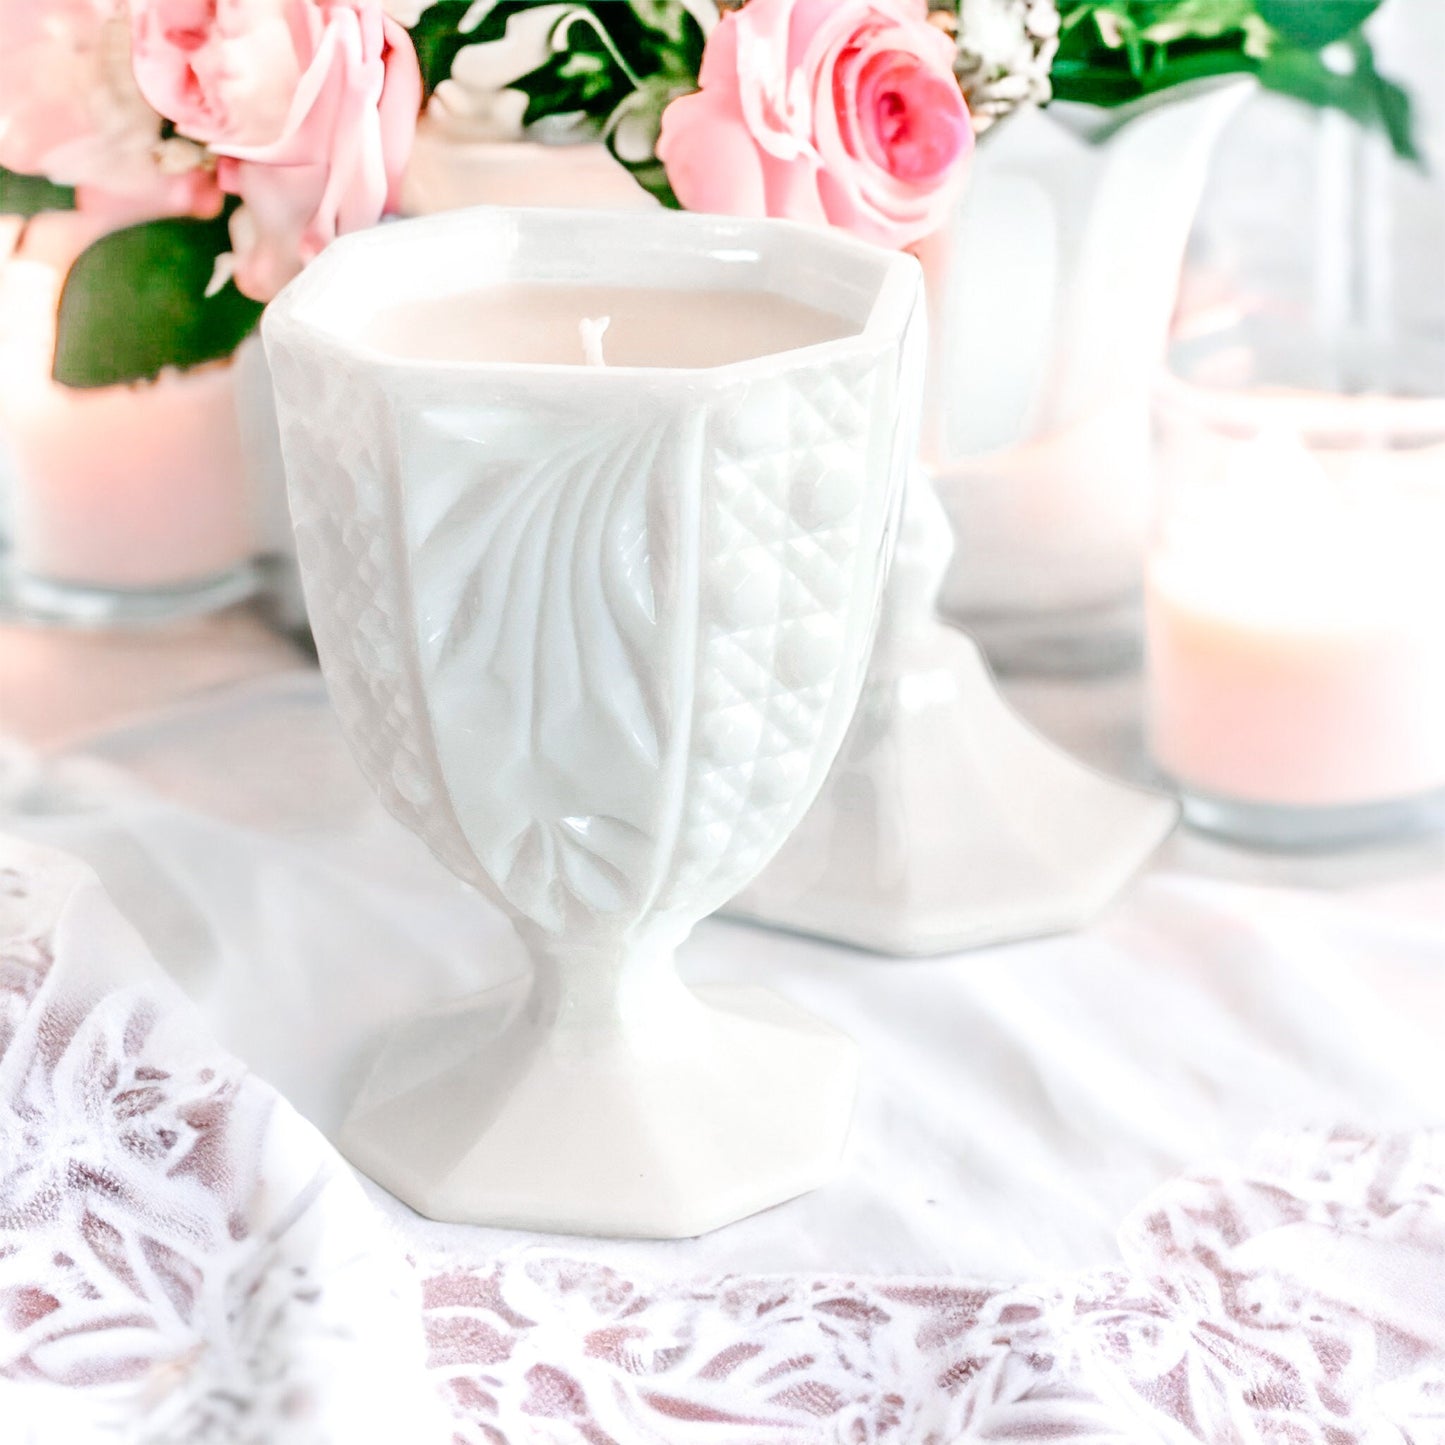 Soy Candle in Vintage Milk Glass Apothecary Jar